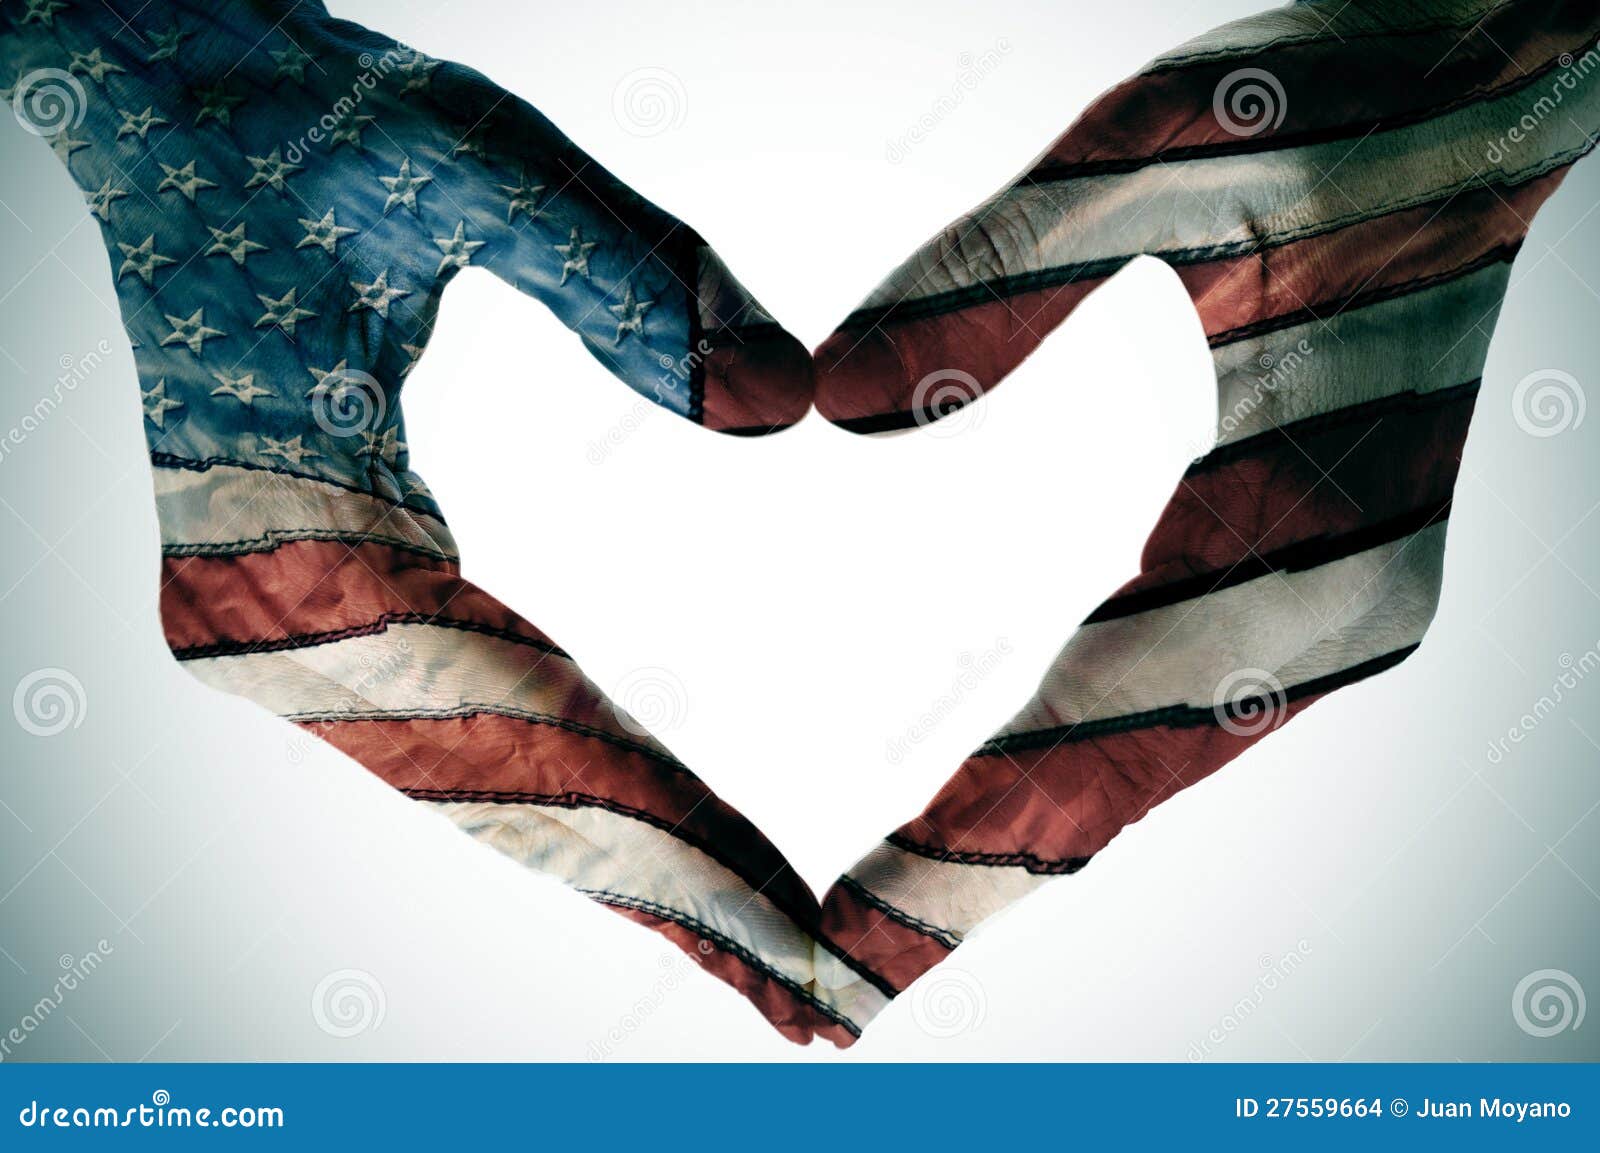 America in the heart stock photo. Image of love, greeting - 27559664